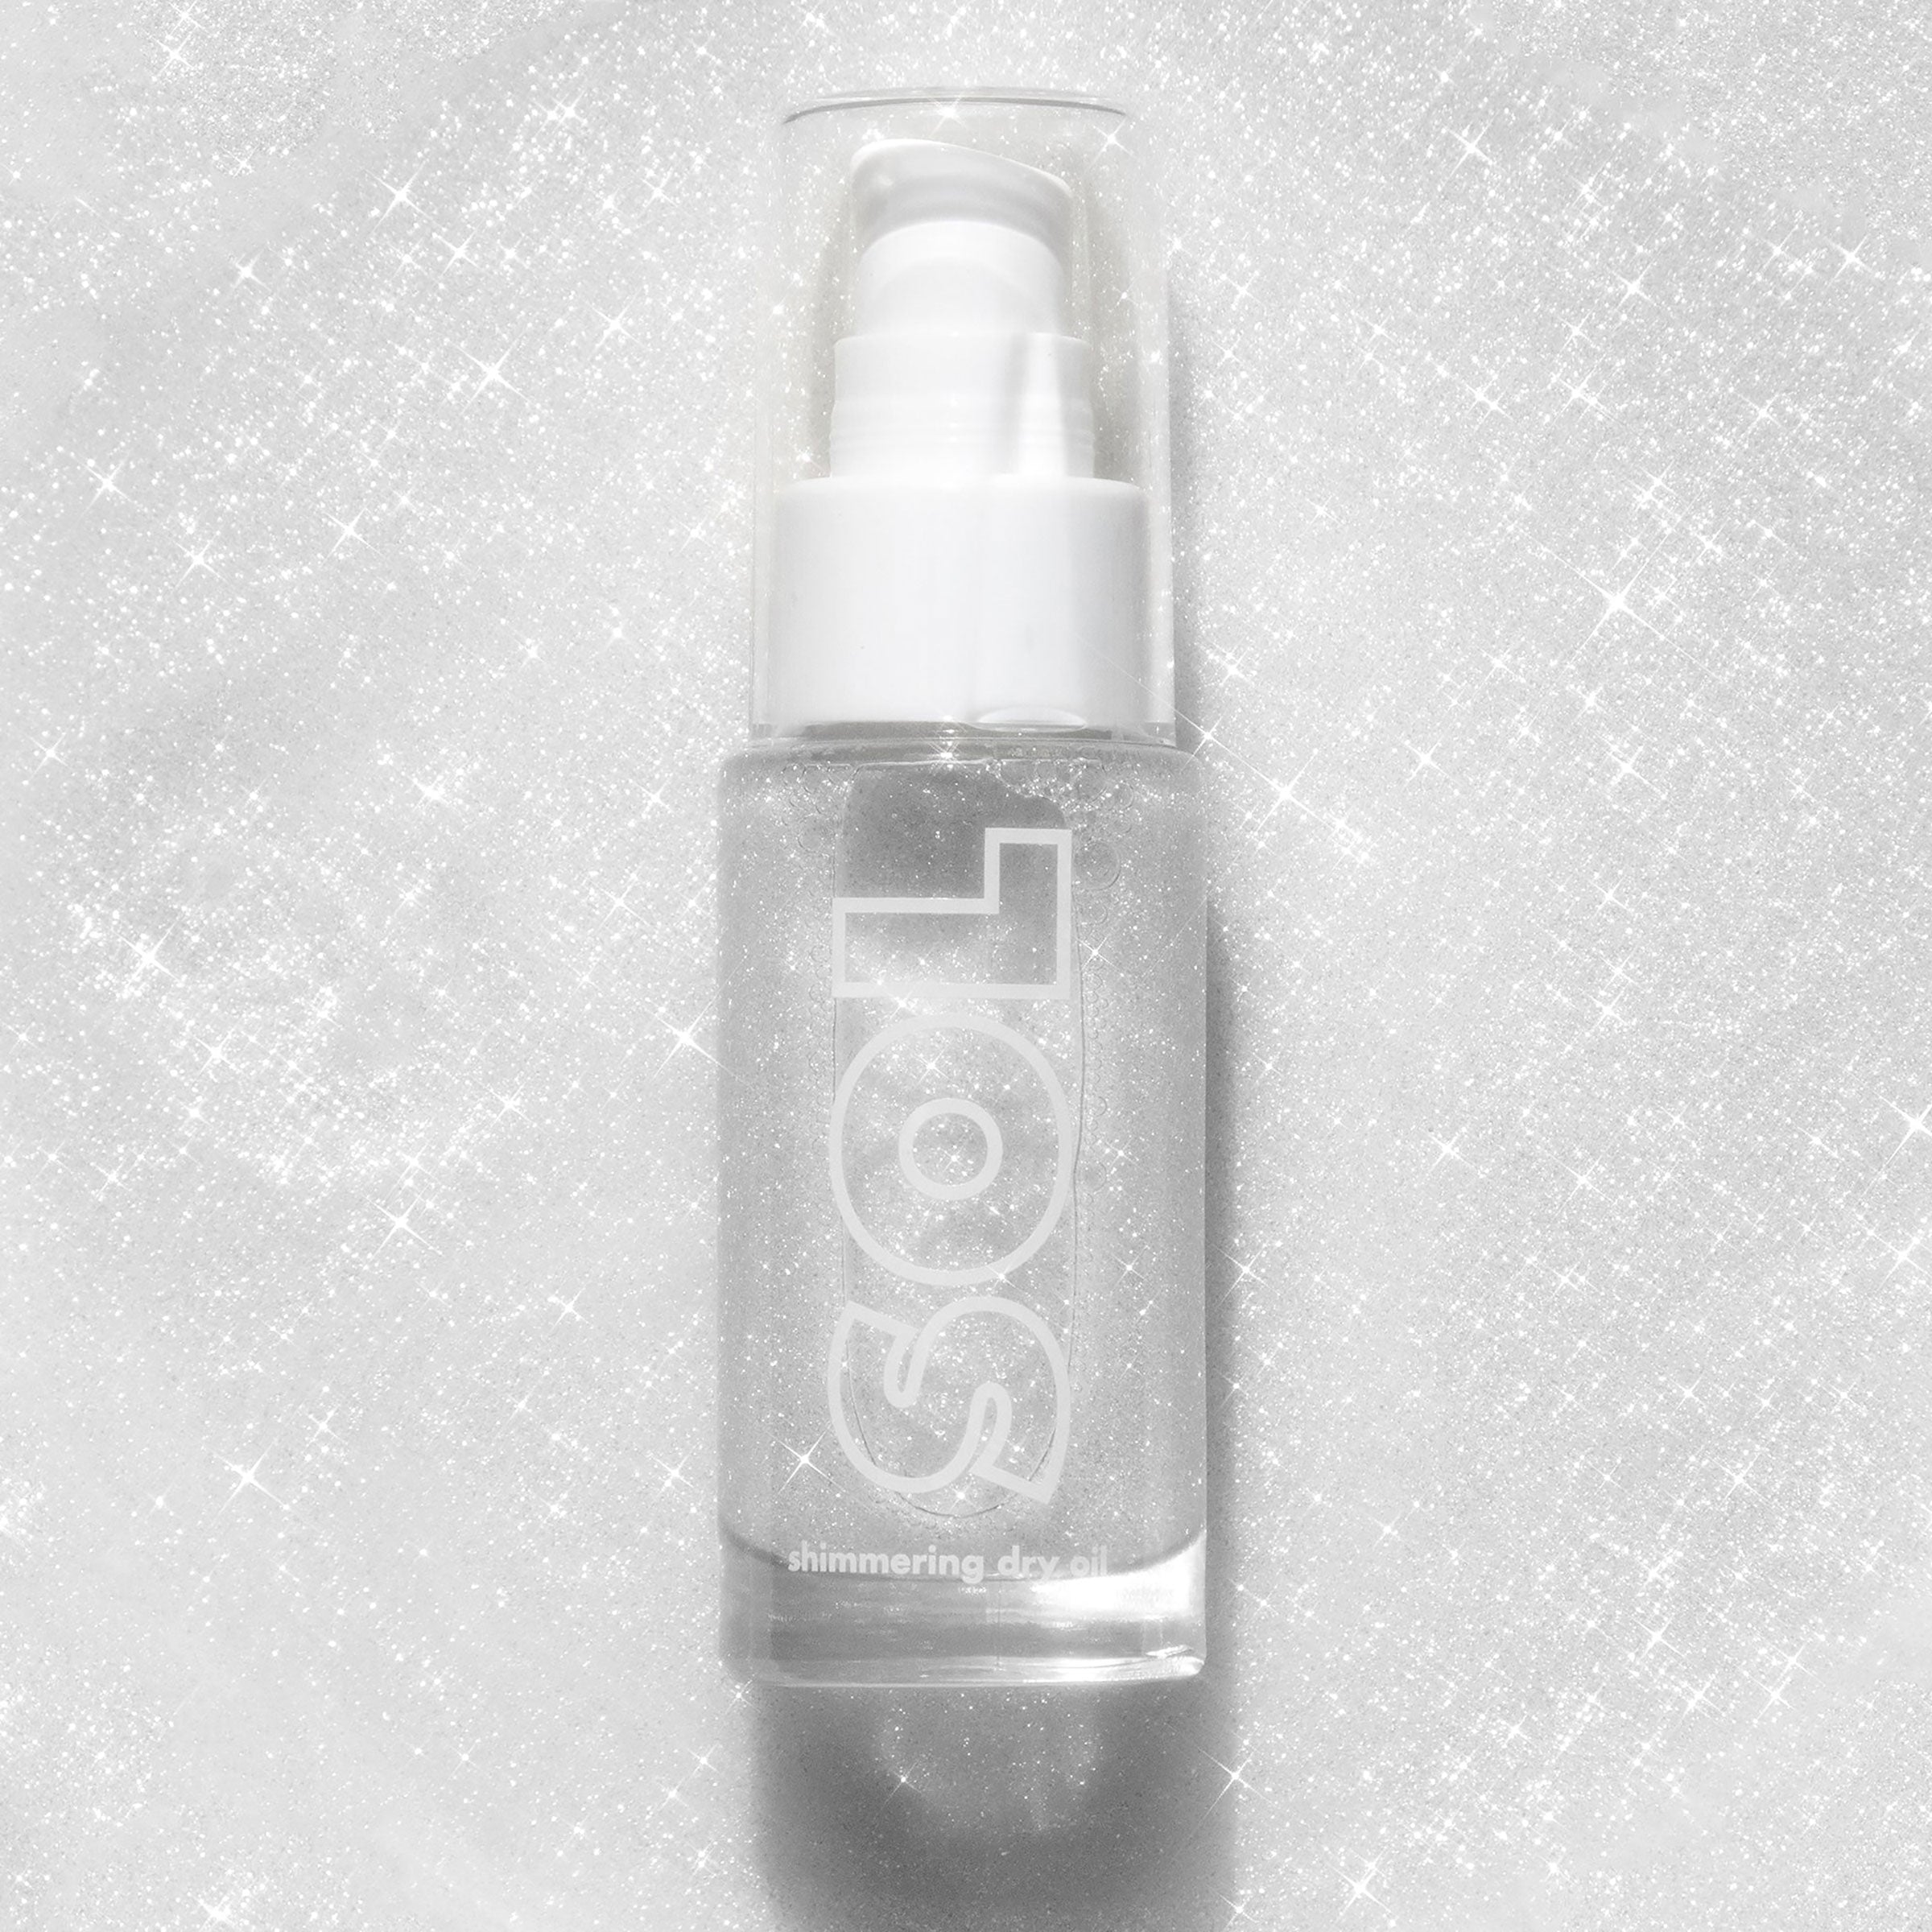 Sterling Silver SOL Body Mini Shimmering Dry Oil a vivid true silver with pinpoints of silver pearl